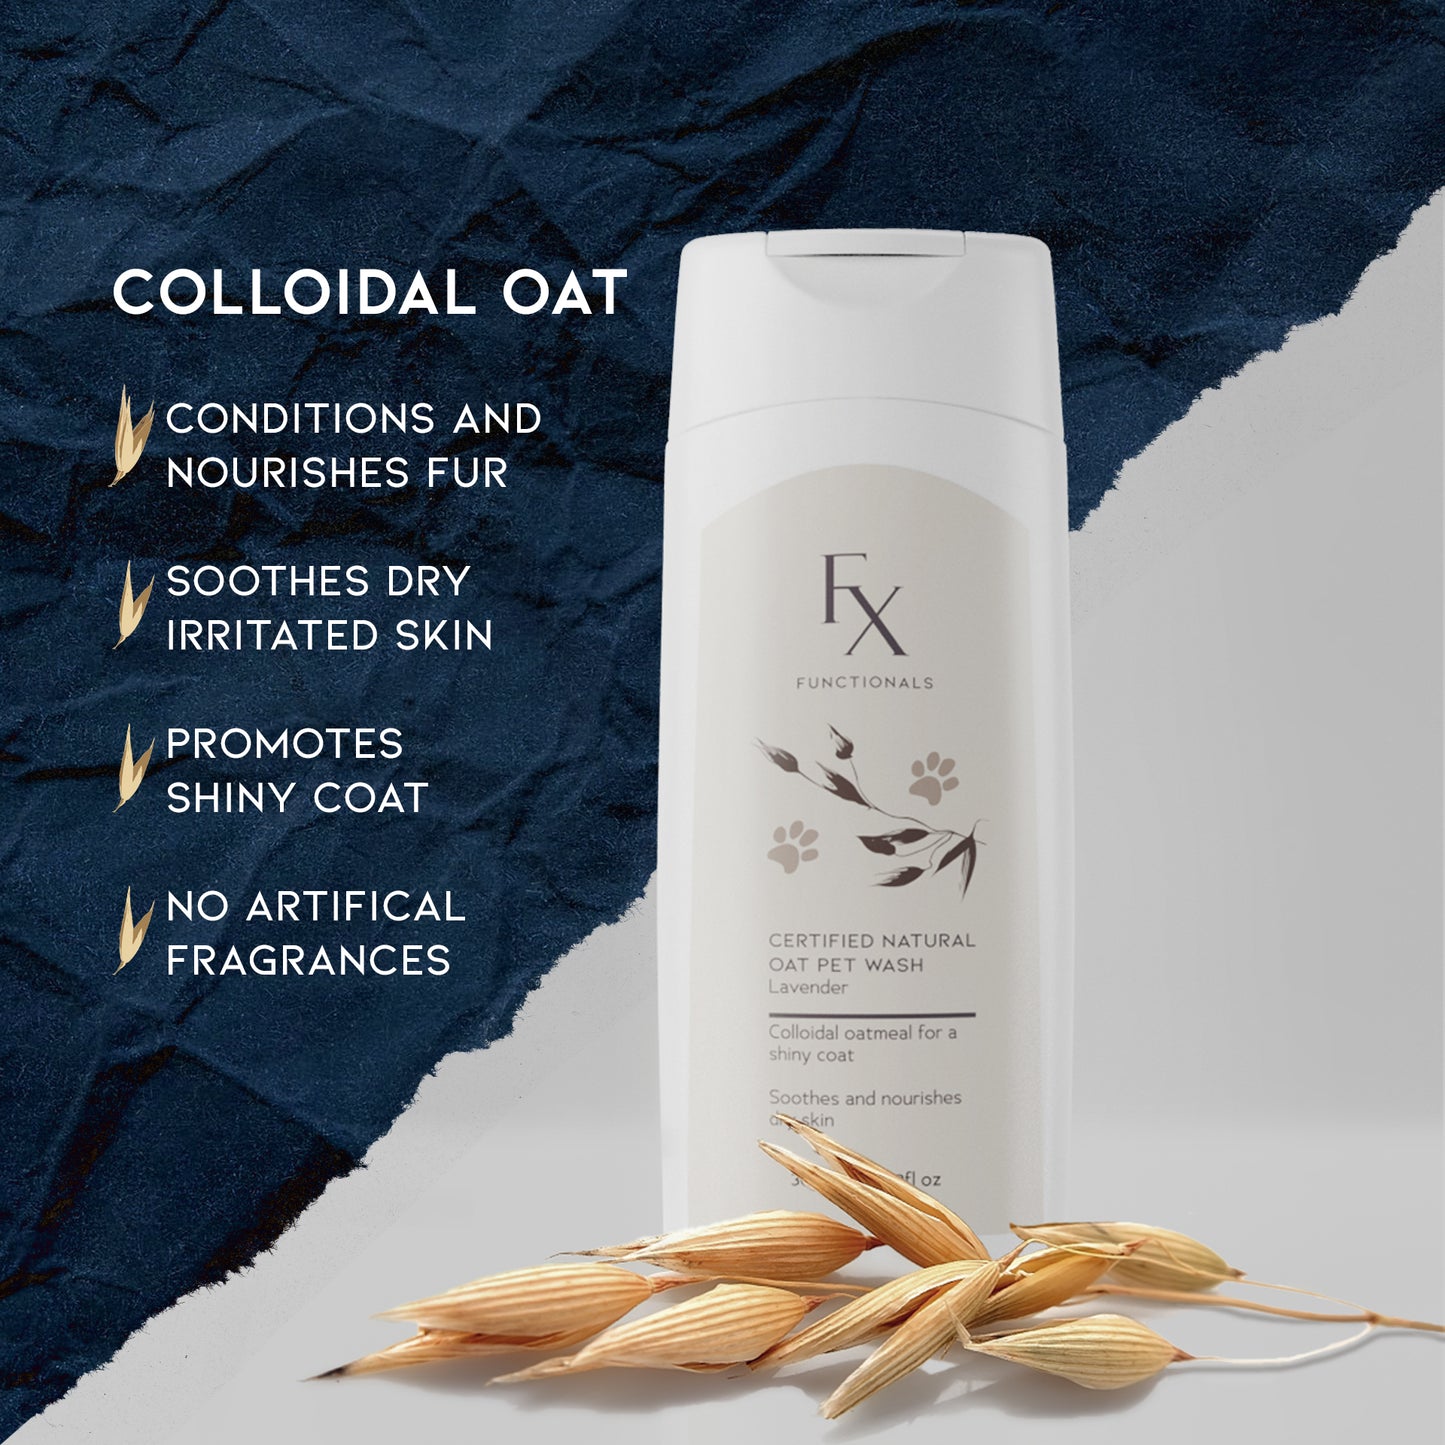 Functionals Natural Oat Petwash bottle with oats, contains colloidal oat to nourish, soothe fur and promote a shiny coat. No artificial fragrances.